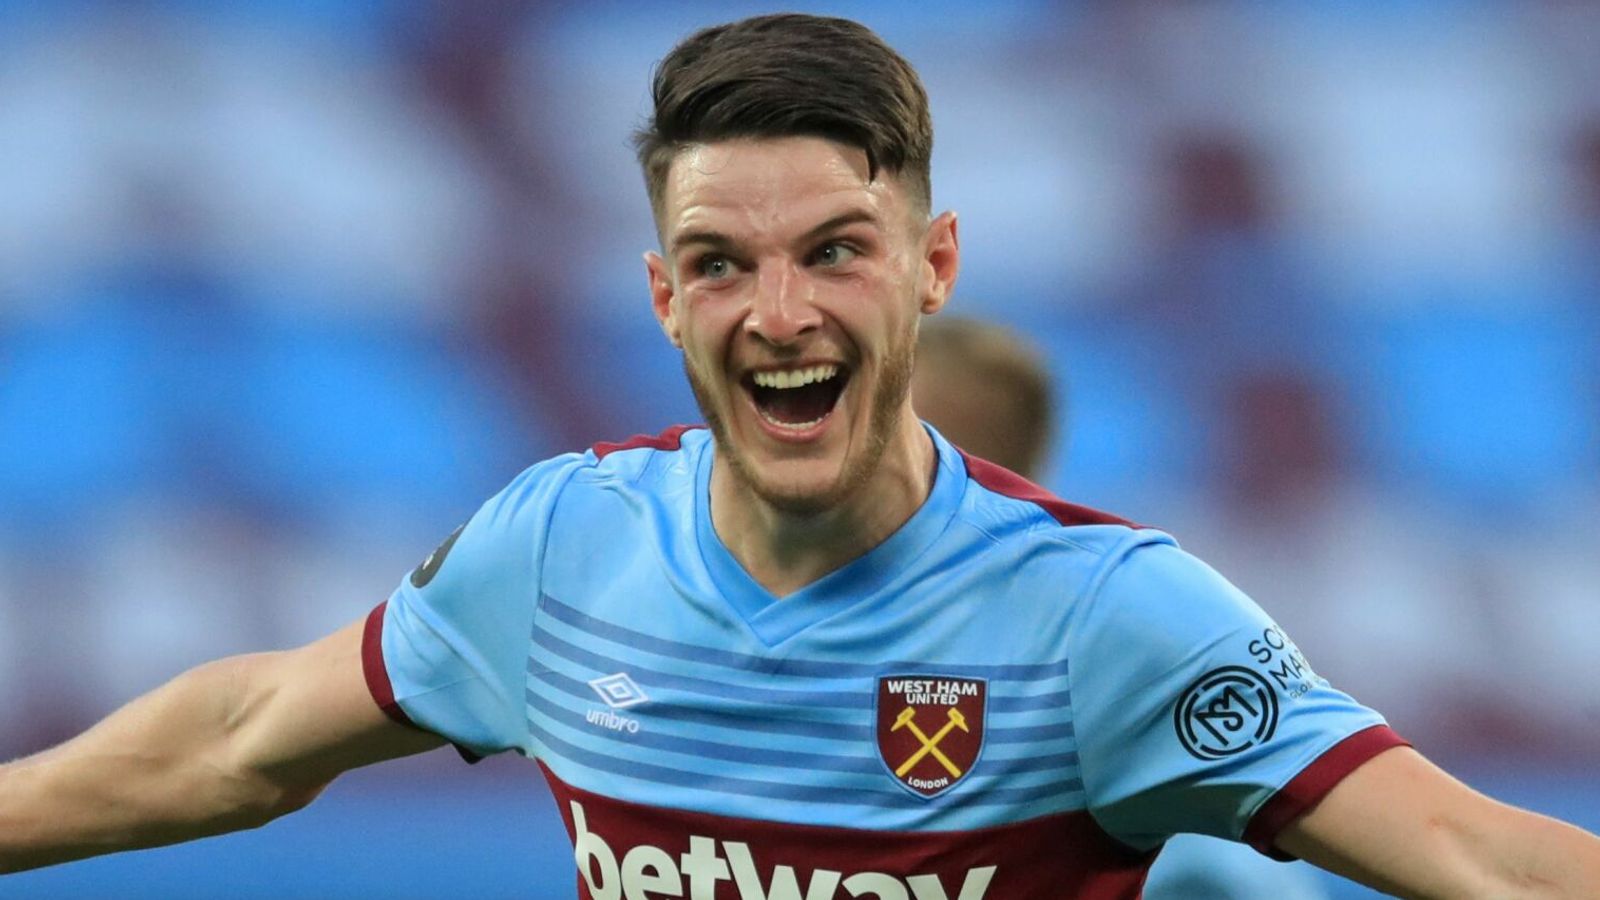 Declan Rice will soon be West Ham captain and will not be sold cheap, says David Moyes ...